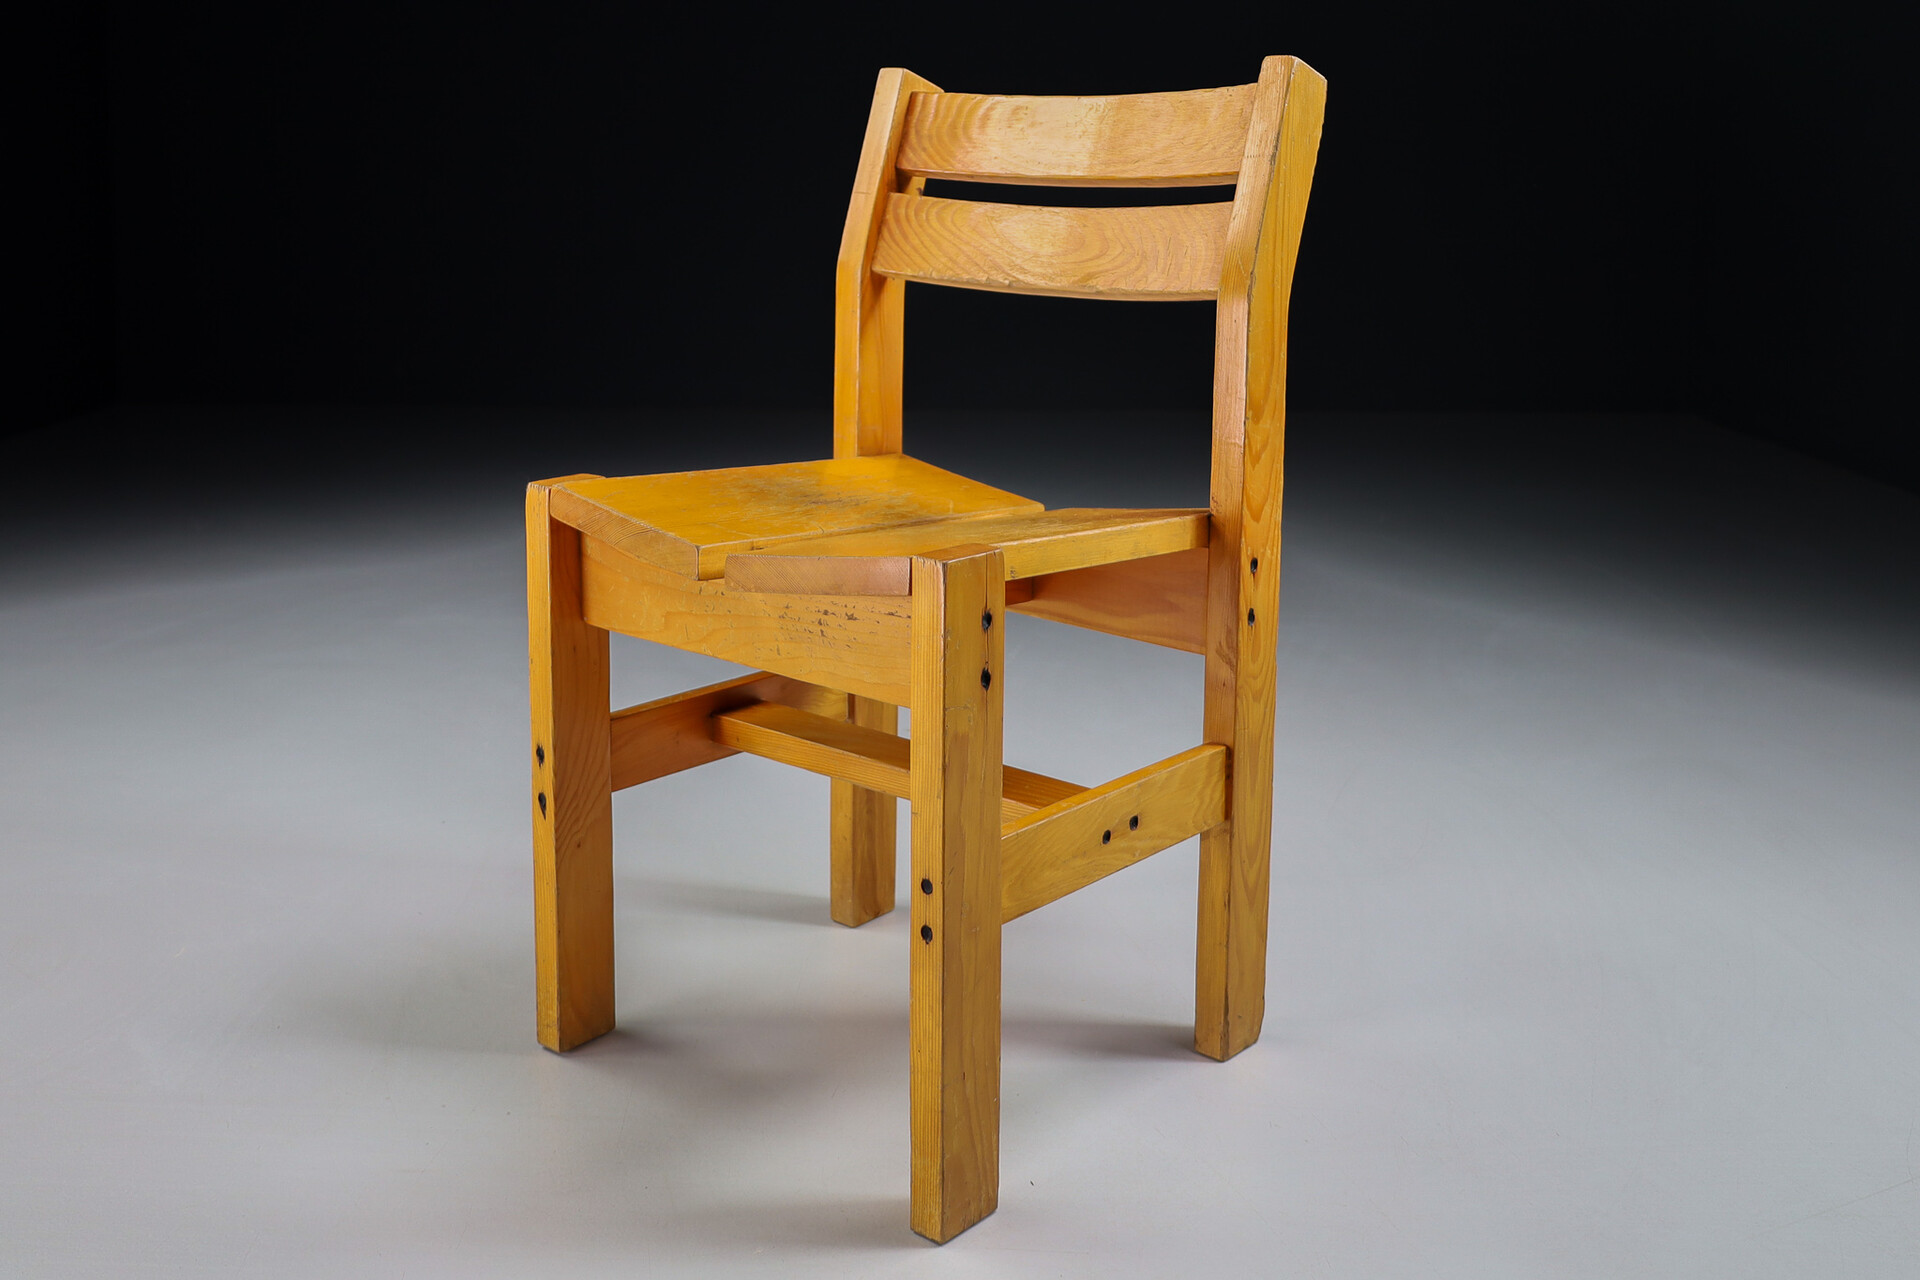 Charlotte Perriand, Low Chair — in alcova